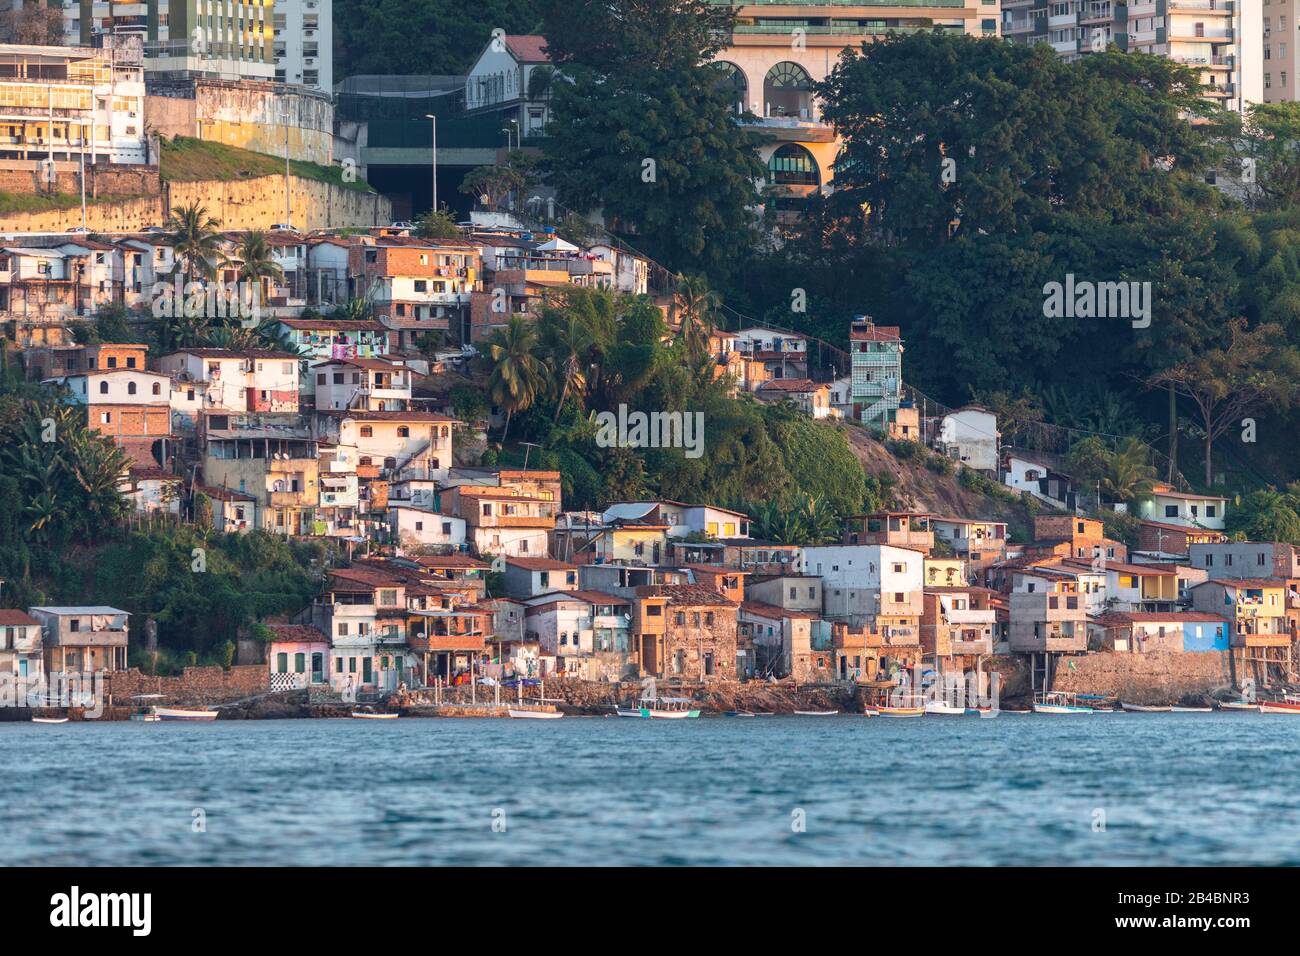 Brazil, State of Bahia, Salvador de Bahia, from Bahia Bay, view of the city and the facades of the popular district of Gamboa Low Stock Photo